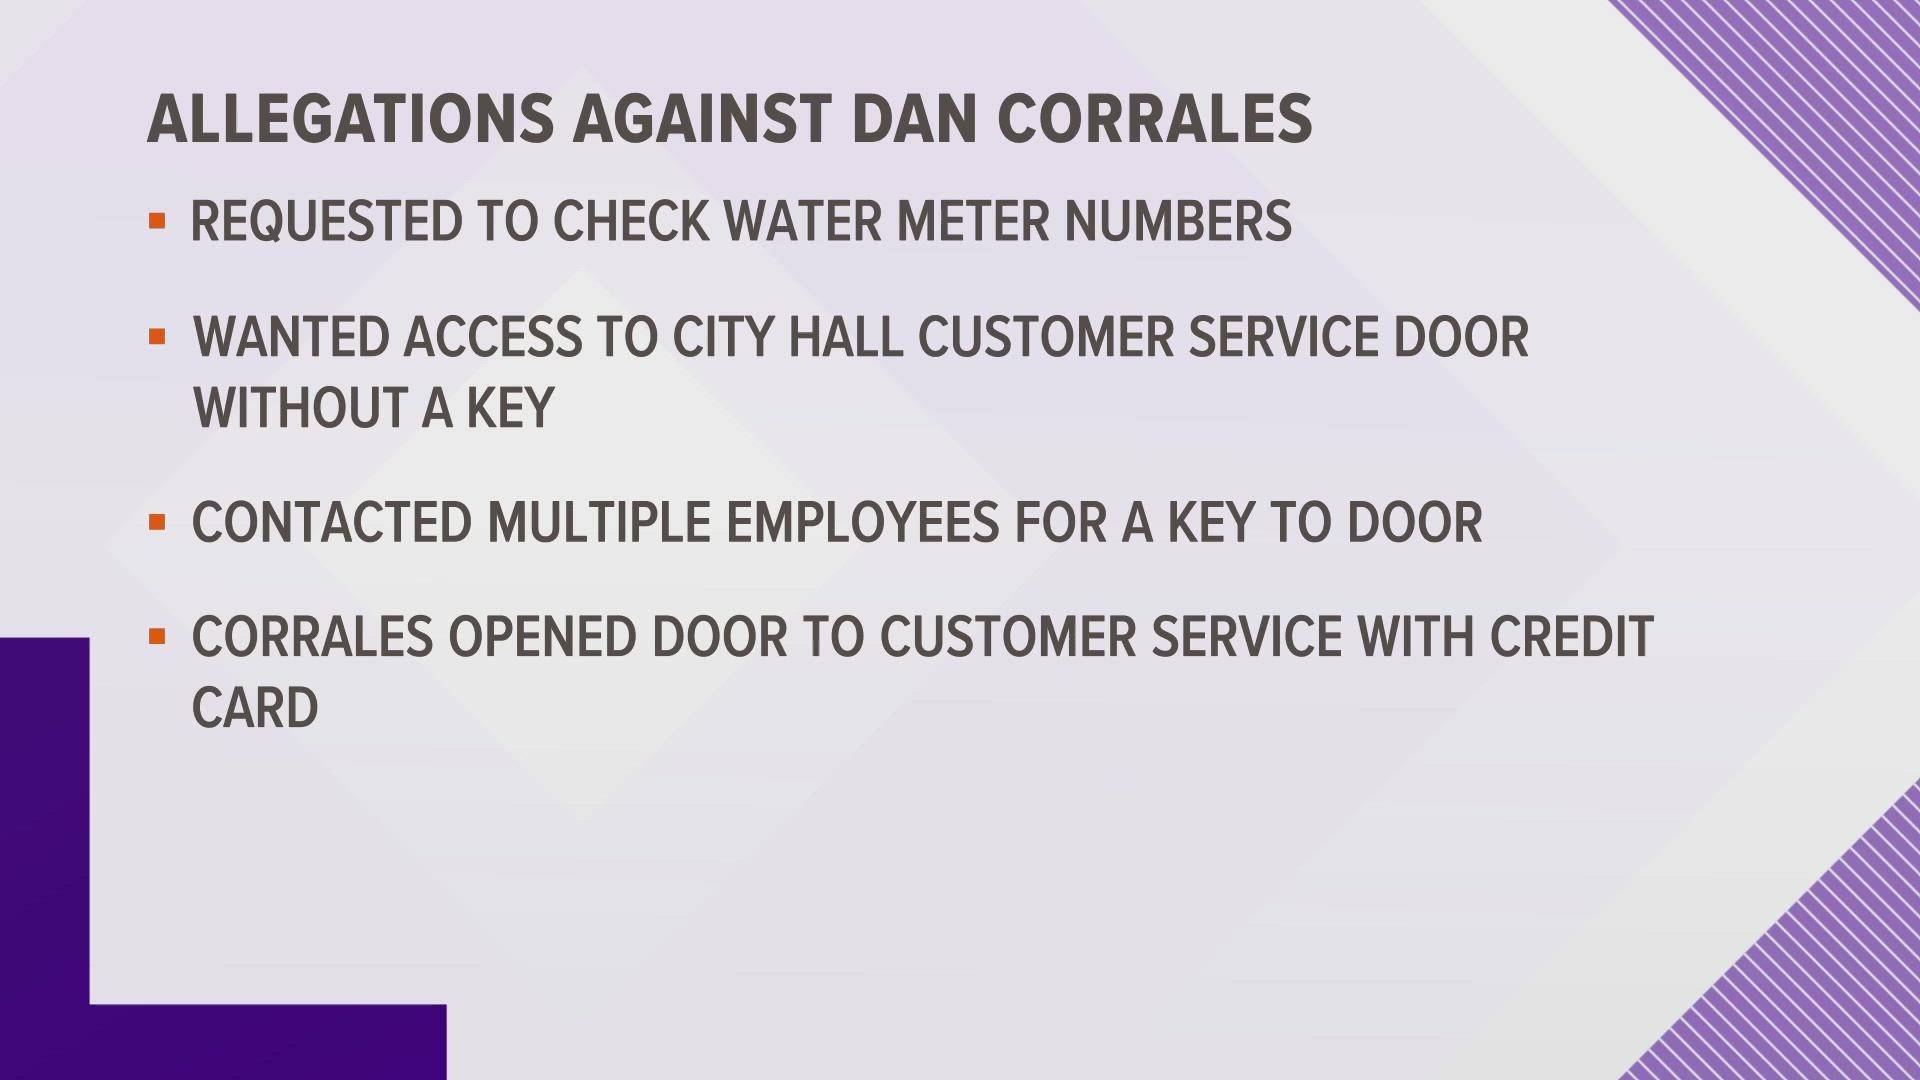 Some people are accusing Corrales of breaking into the City Services Department, but the city councilman denies any wrongdoing.